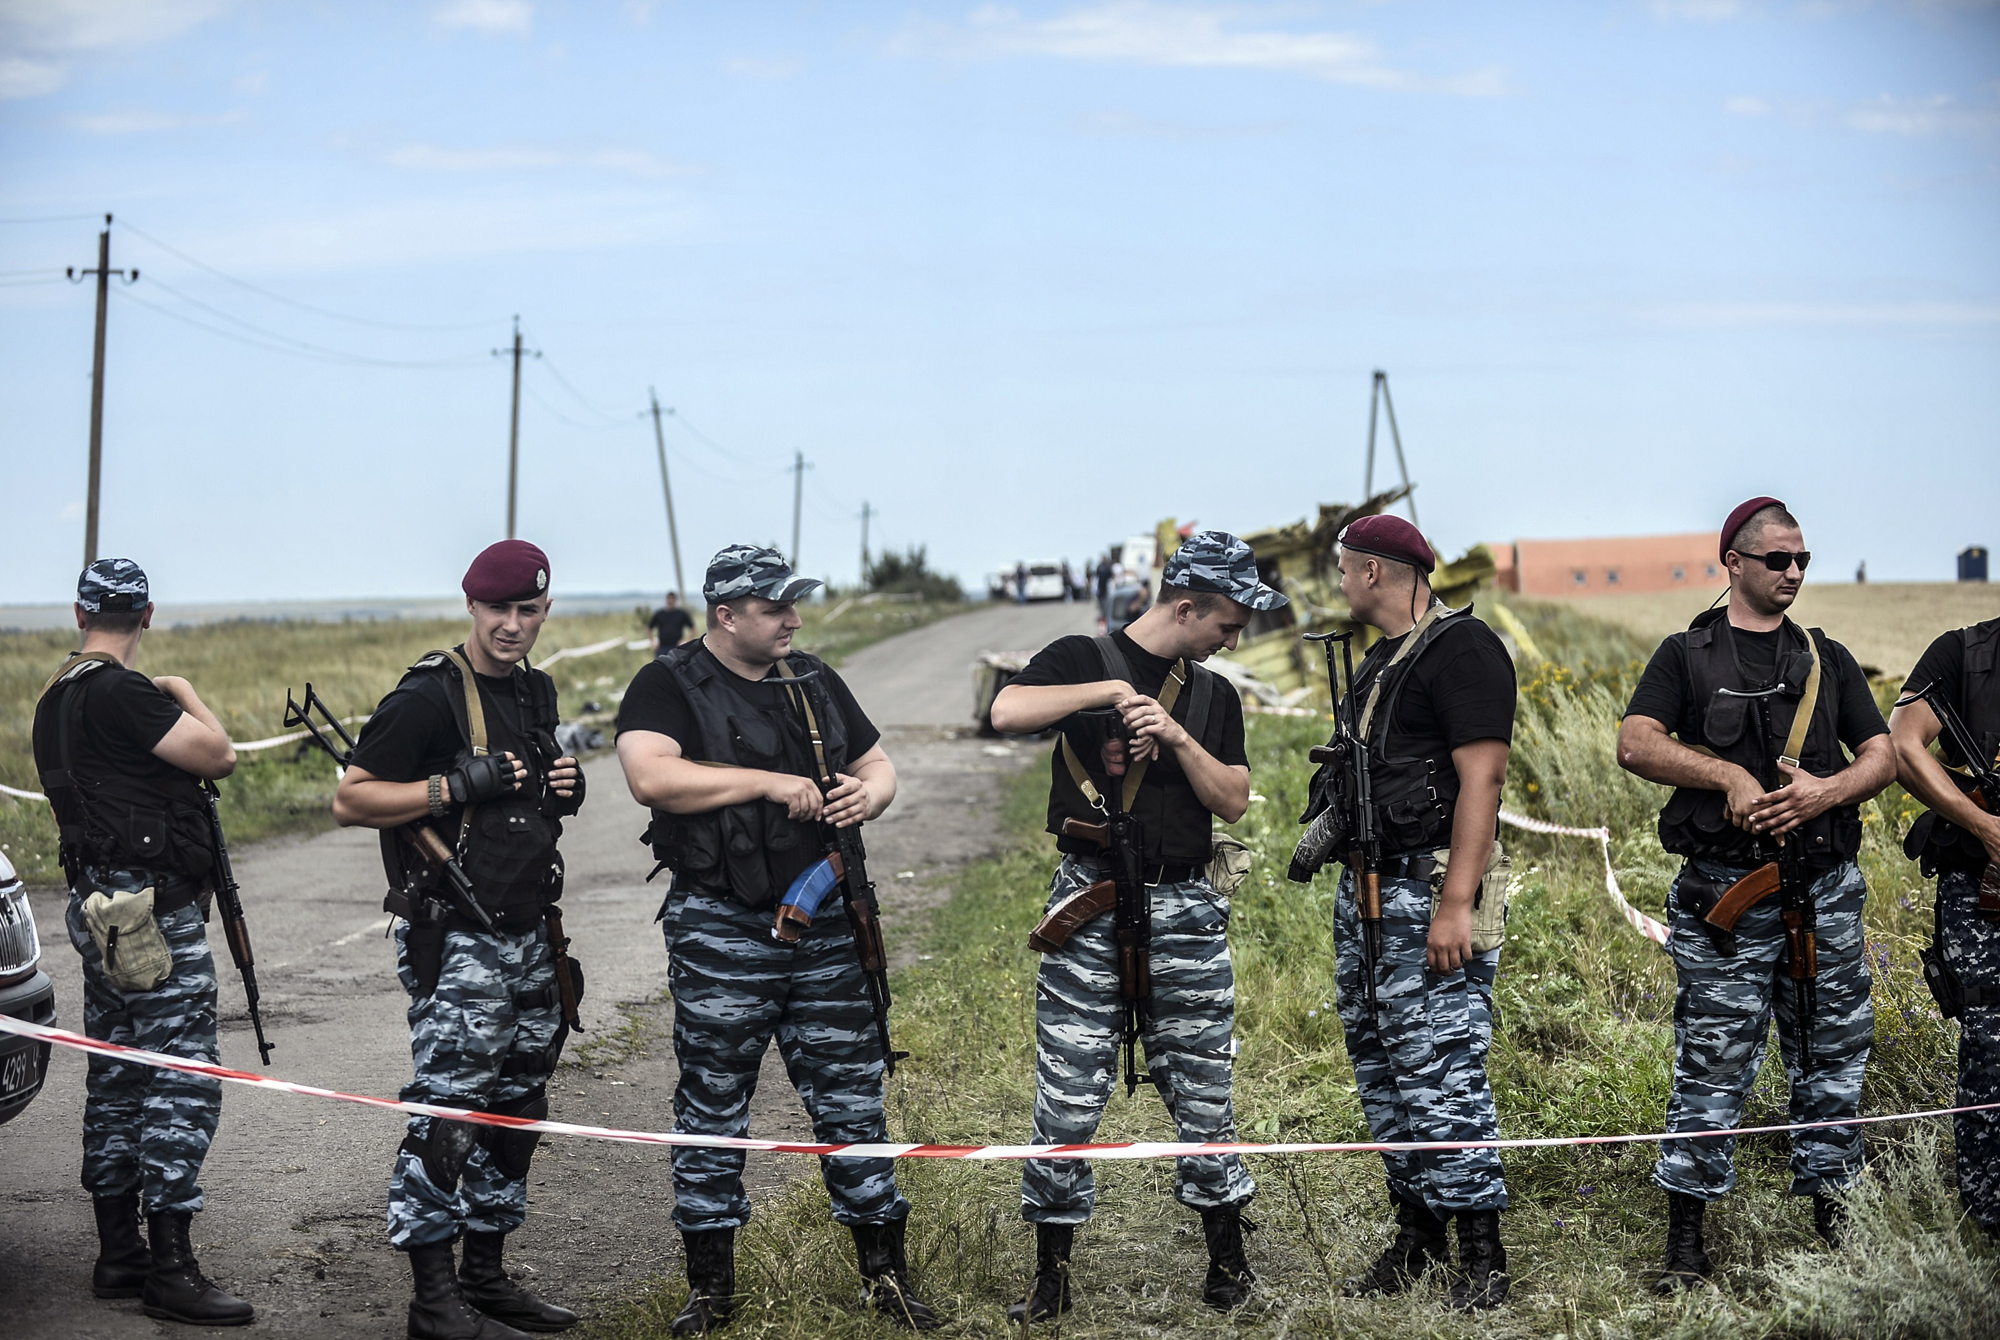 Armed pro-Russian separatists stand guard in front of the crash site of Malaysia Airlines Flight MH17, near the village of Grabove, in the region of Donetsk on July 20, 2014. (Bulent Kilic—AFP/Getty Images)